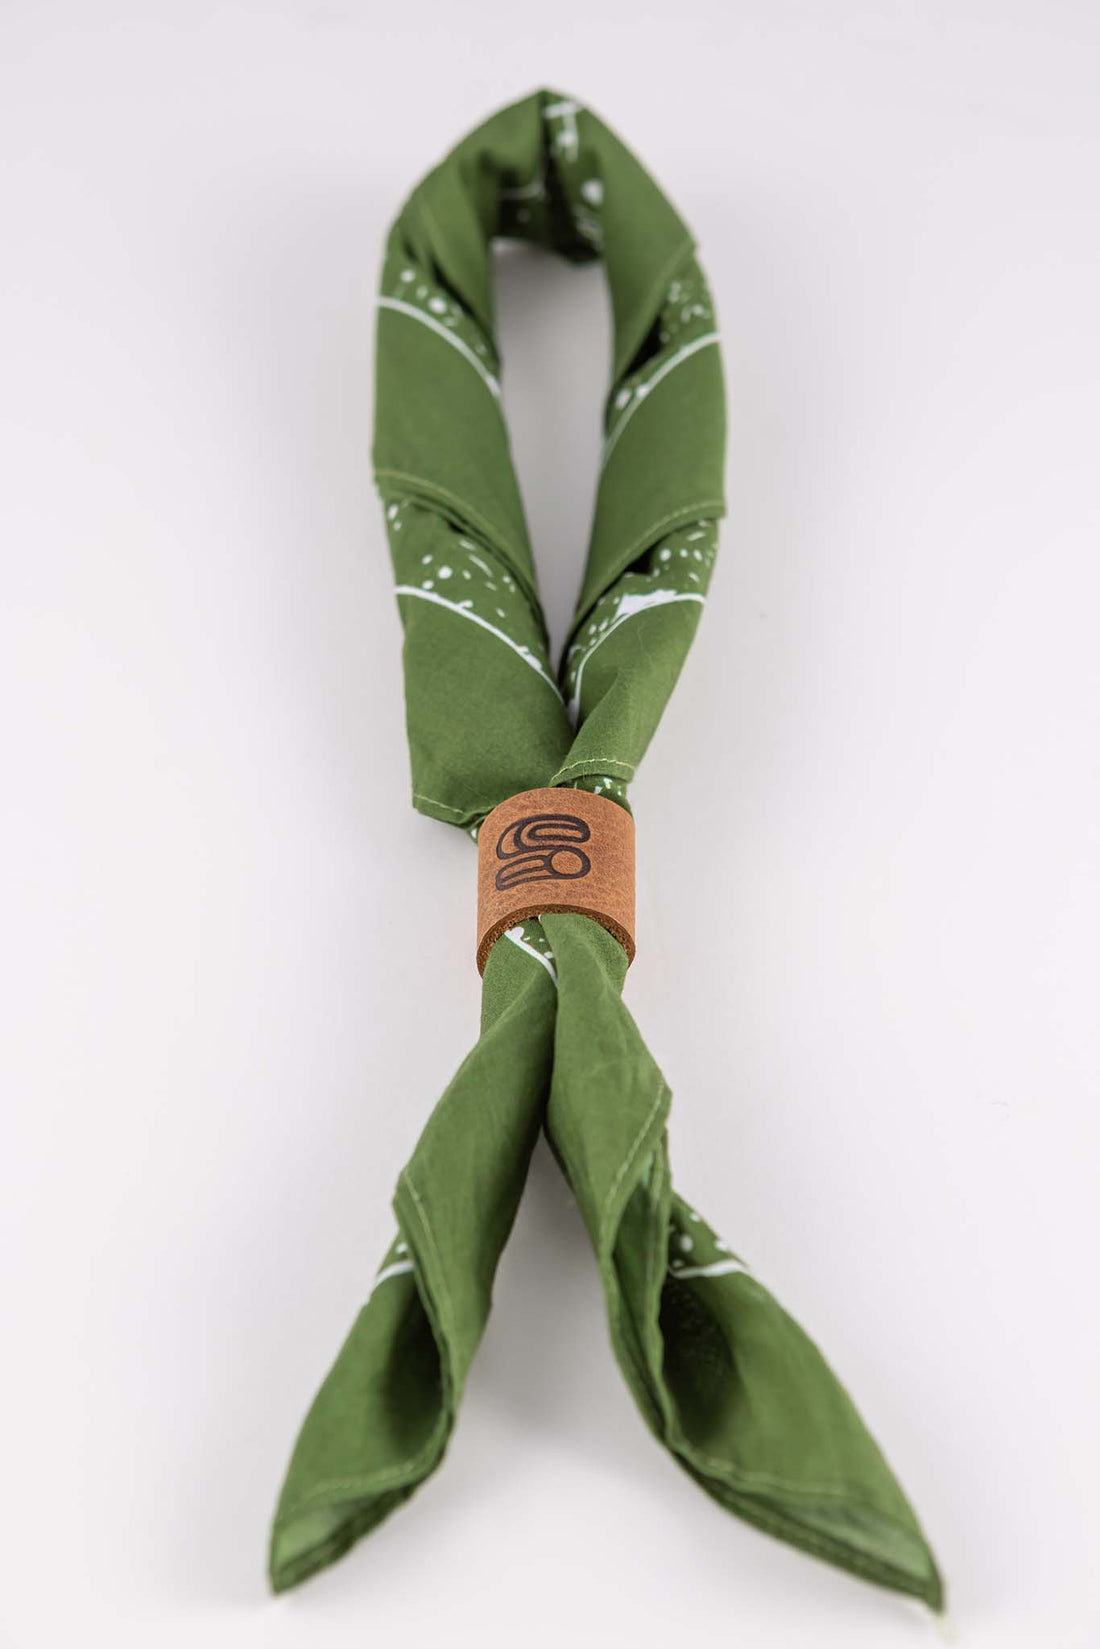 Leather bandana slide in brown genuine leather with stamped Sound As Ever "S" logo that ties closed a green bandana